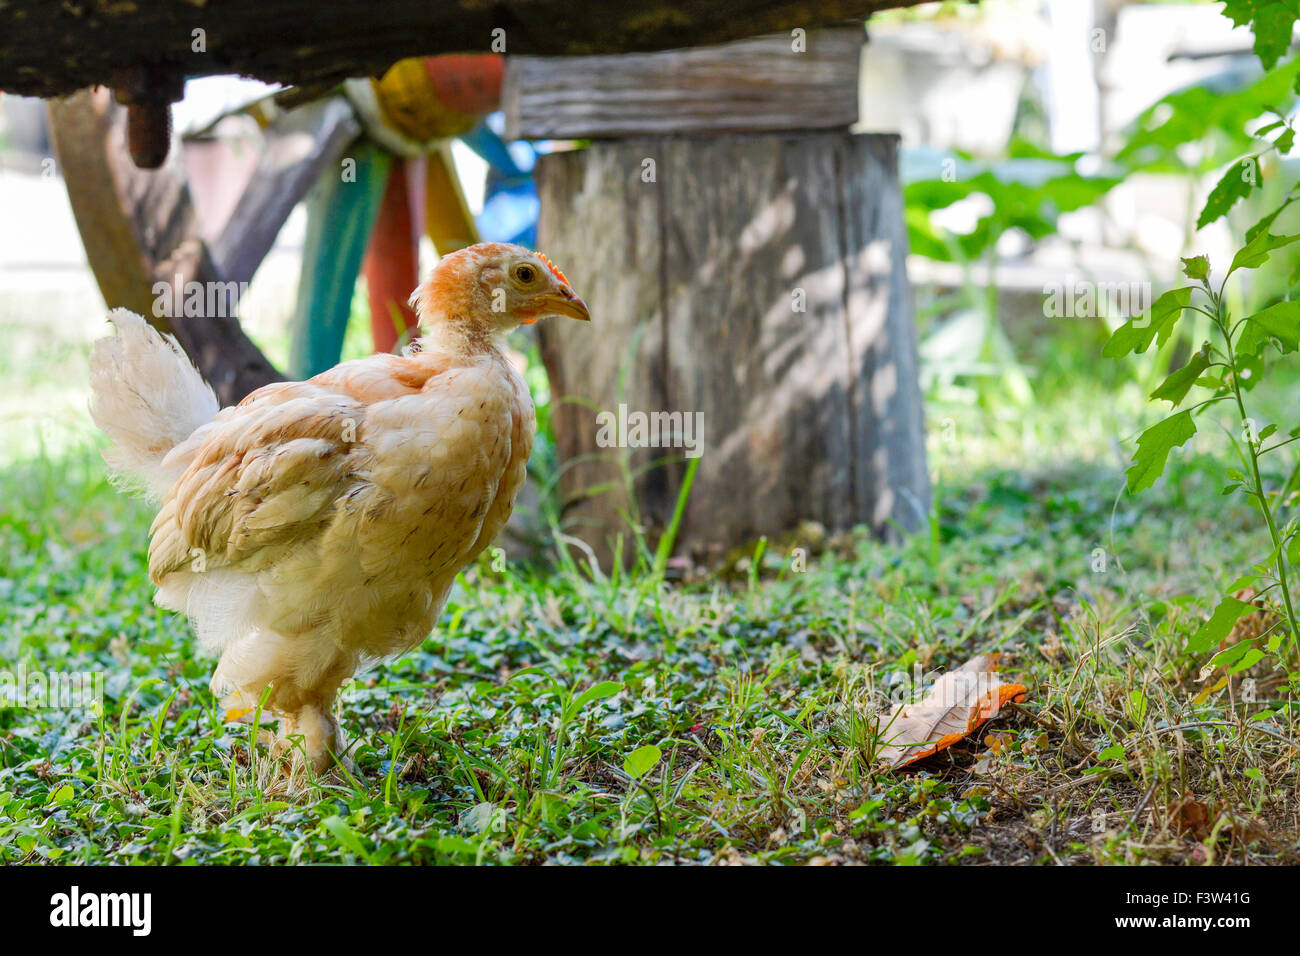 Small chicken in a garden with colored wheel in the background Stock Photo